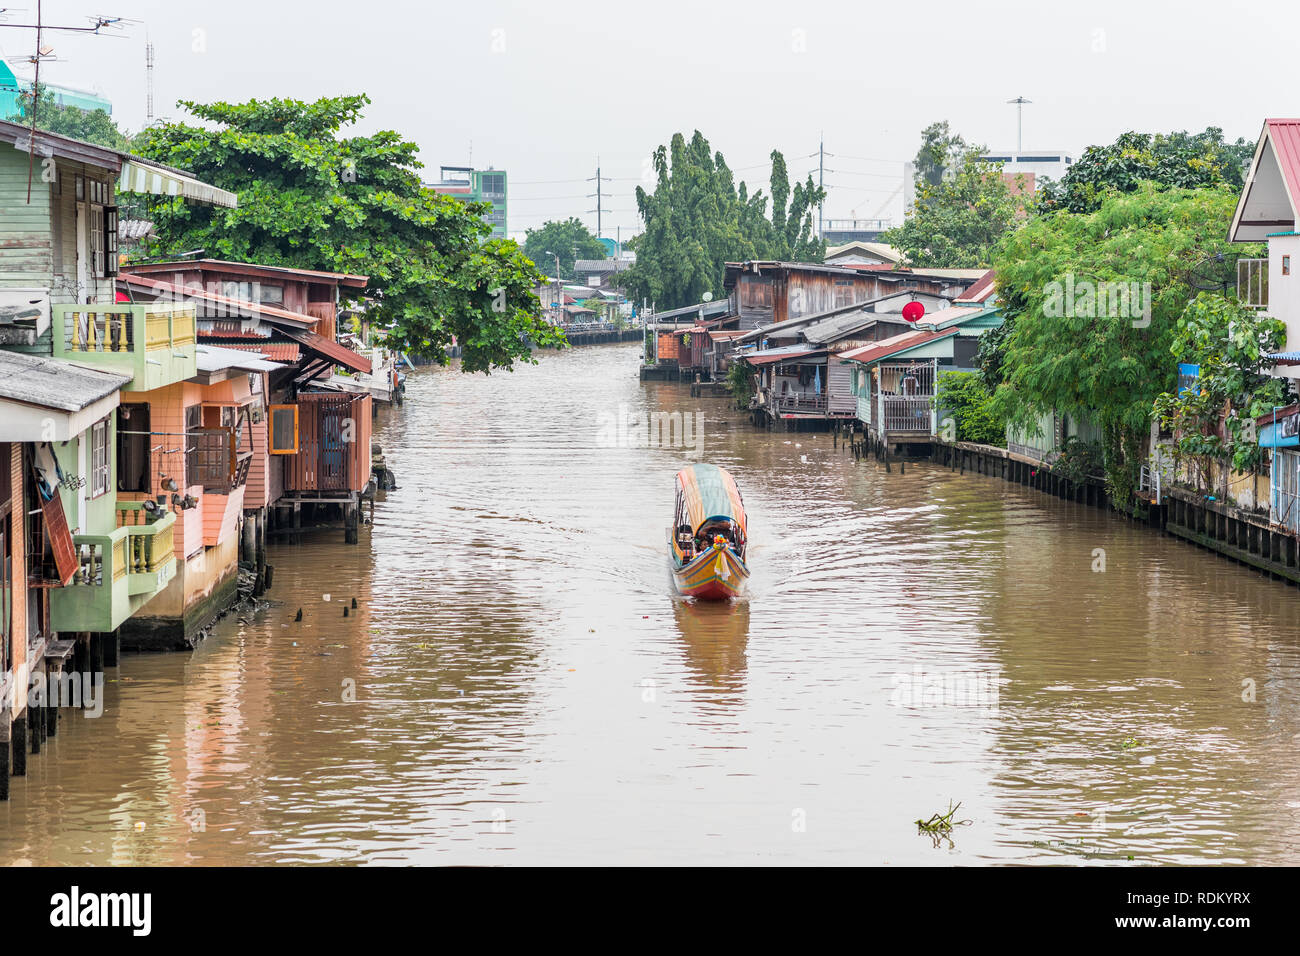 Bangkok, Thailand - September 8, 2018: Khlong Mon, one of the canals of Thonburi, with houses along it and a tourist boat. Stock Photo